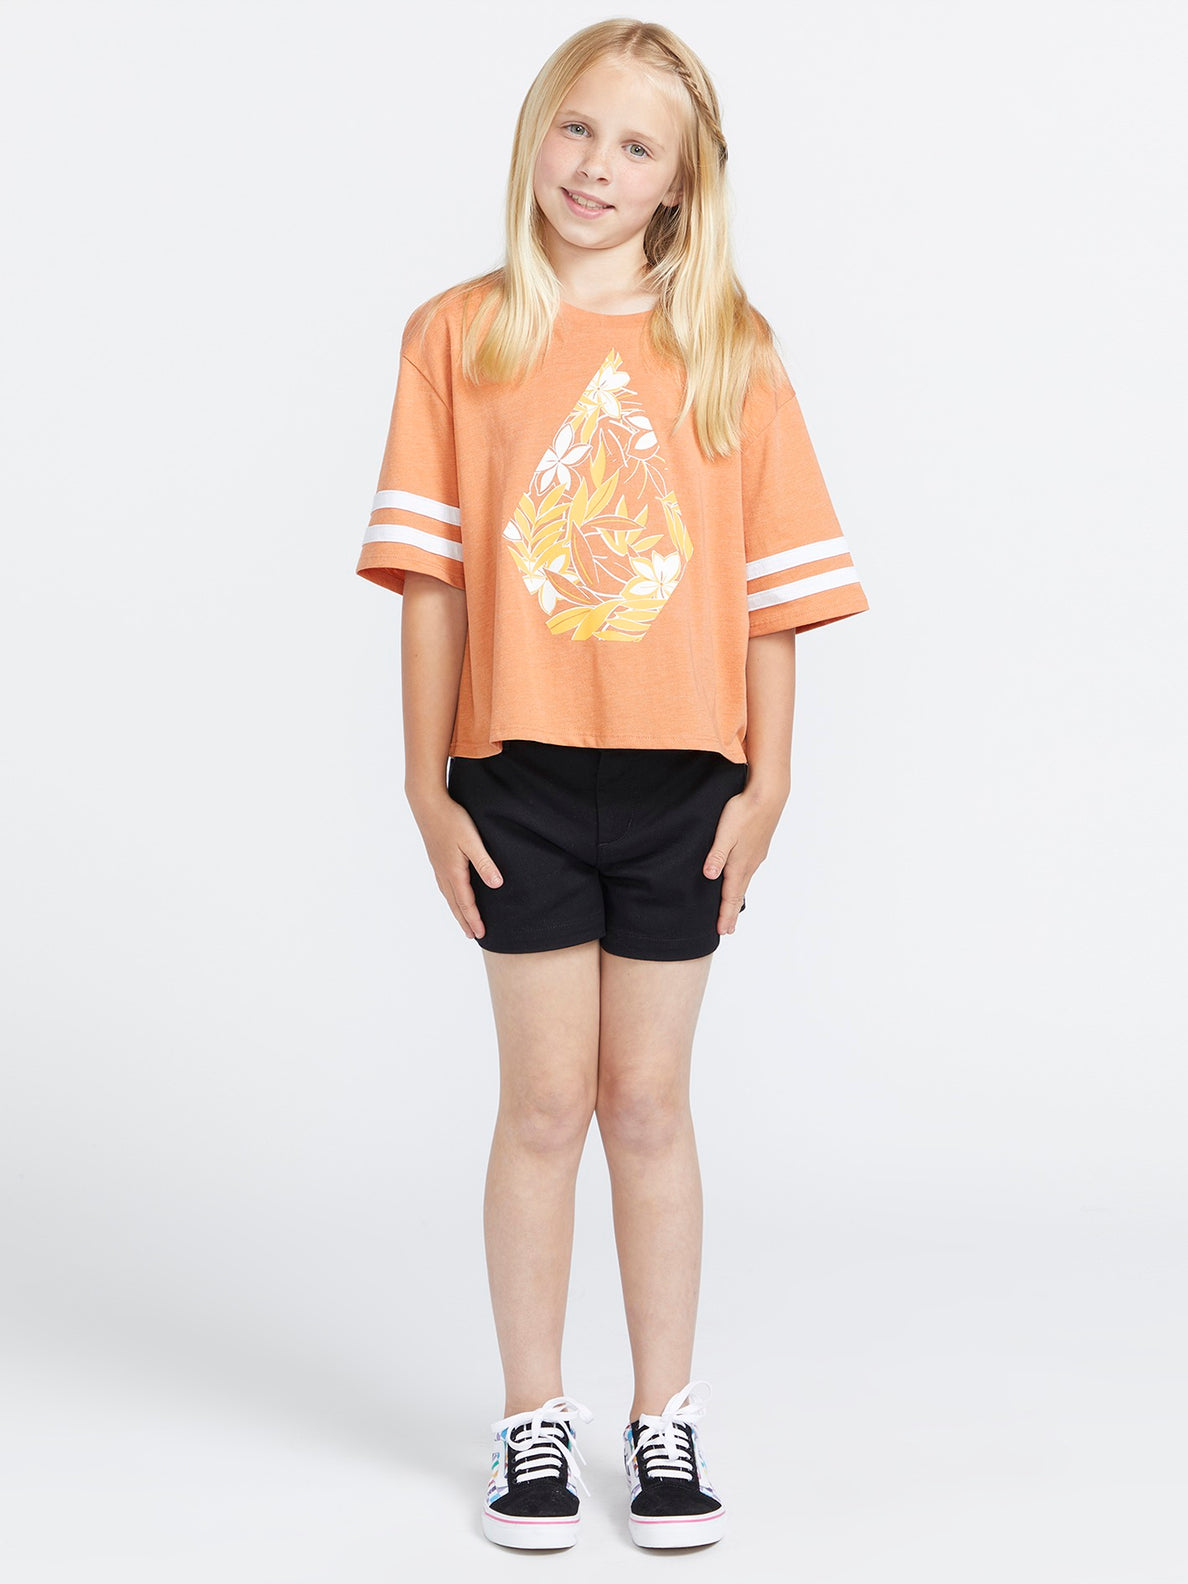 Girls Truly Stoked Tee - Wild Ginger